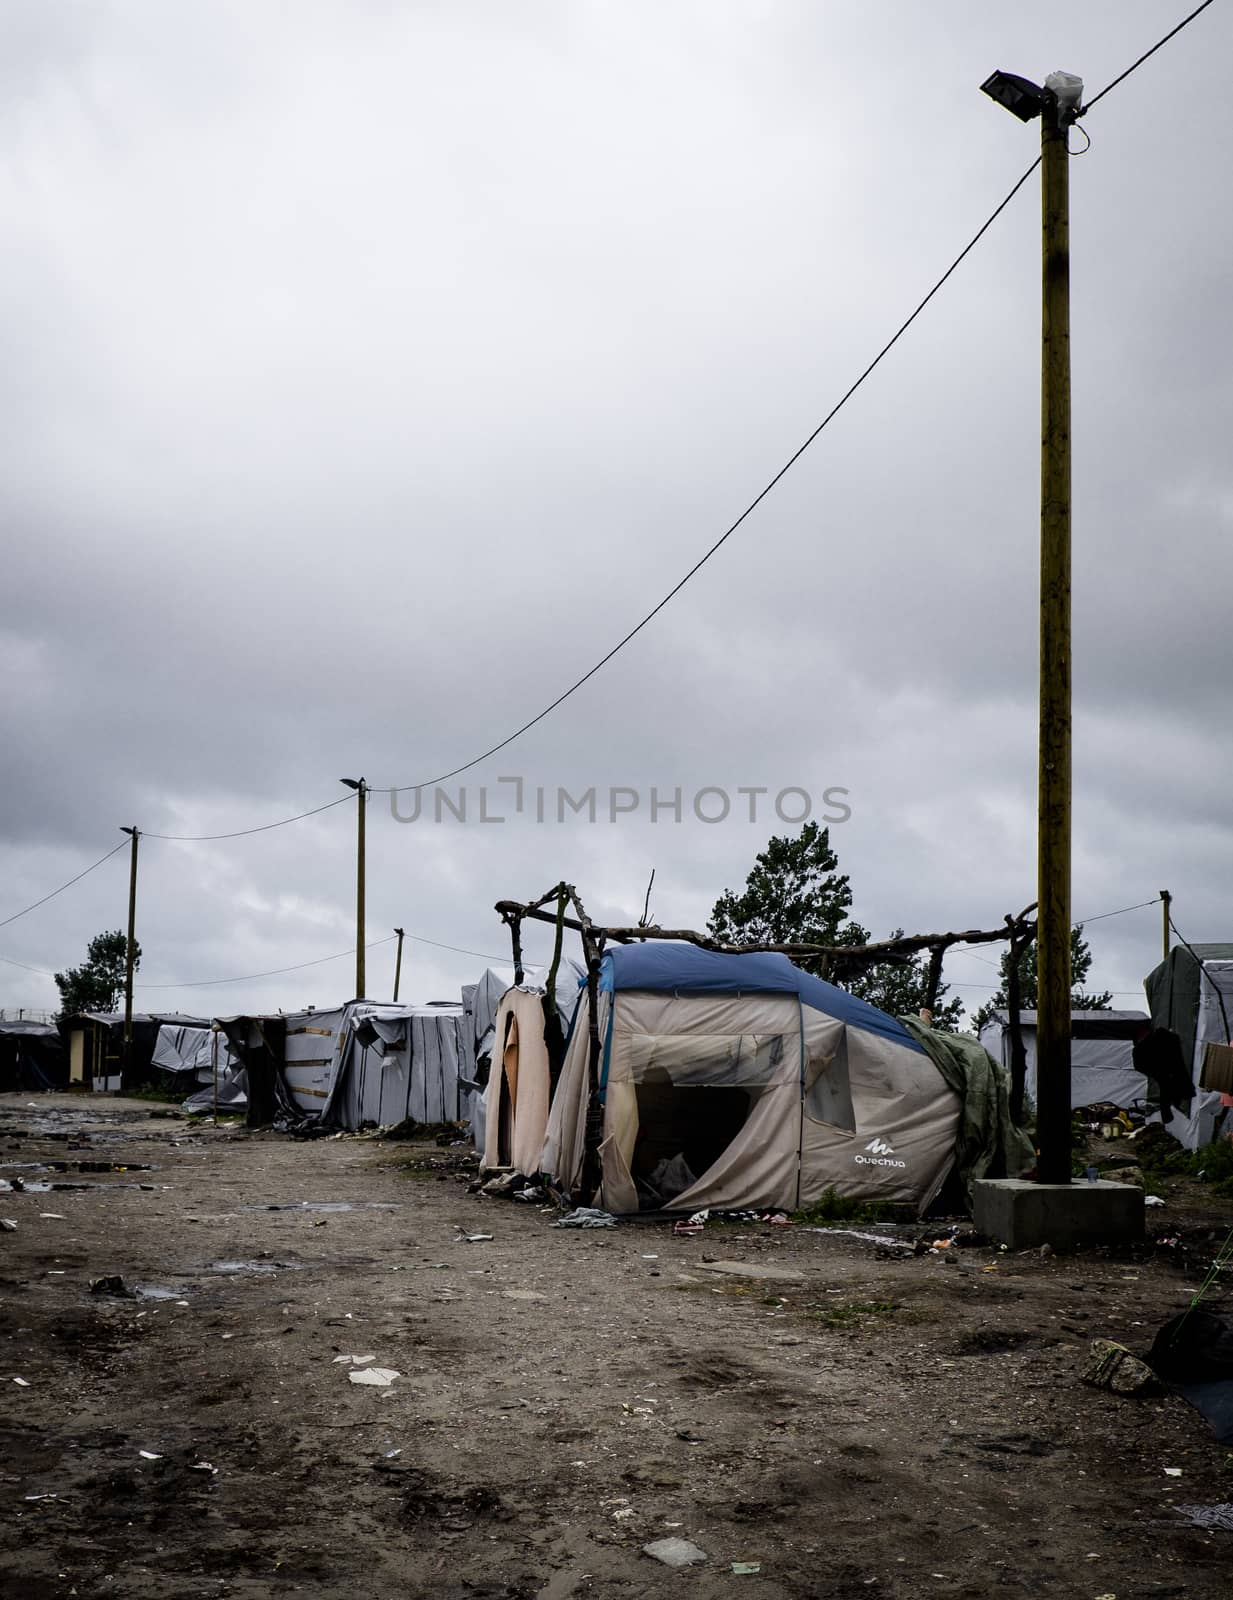 FRANCE, Calais: An empty street is seen at the New Jungle refugee and migrant camp near Calais, France, on September 17, 2015.	Refugees and migrants trying to enter the UK from France are facing dropping temperatures and poor sanitation at the makeshift camp.